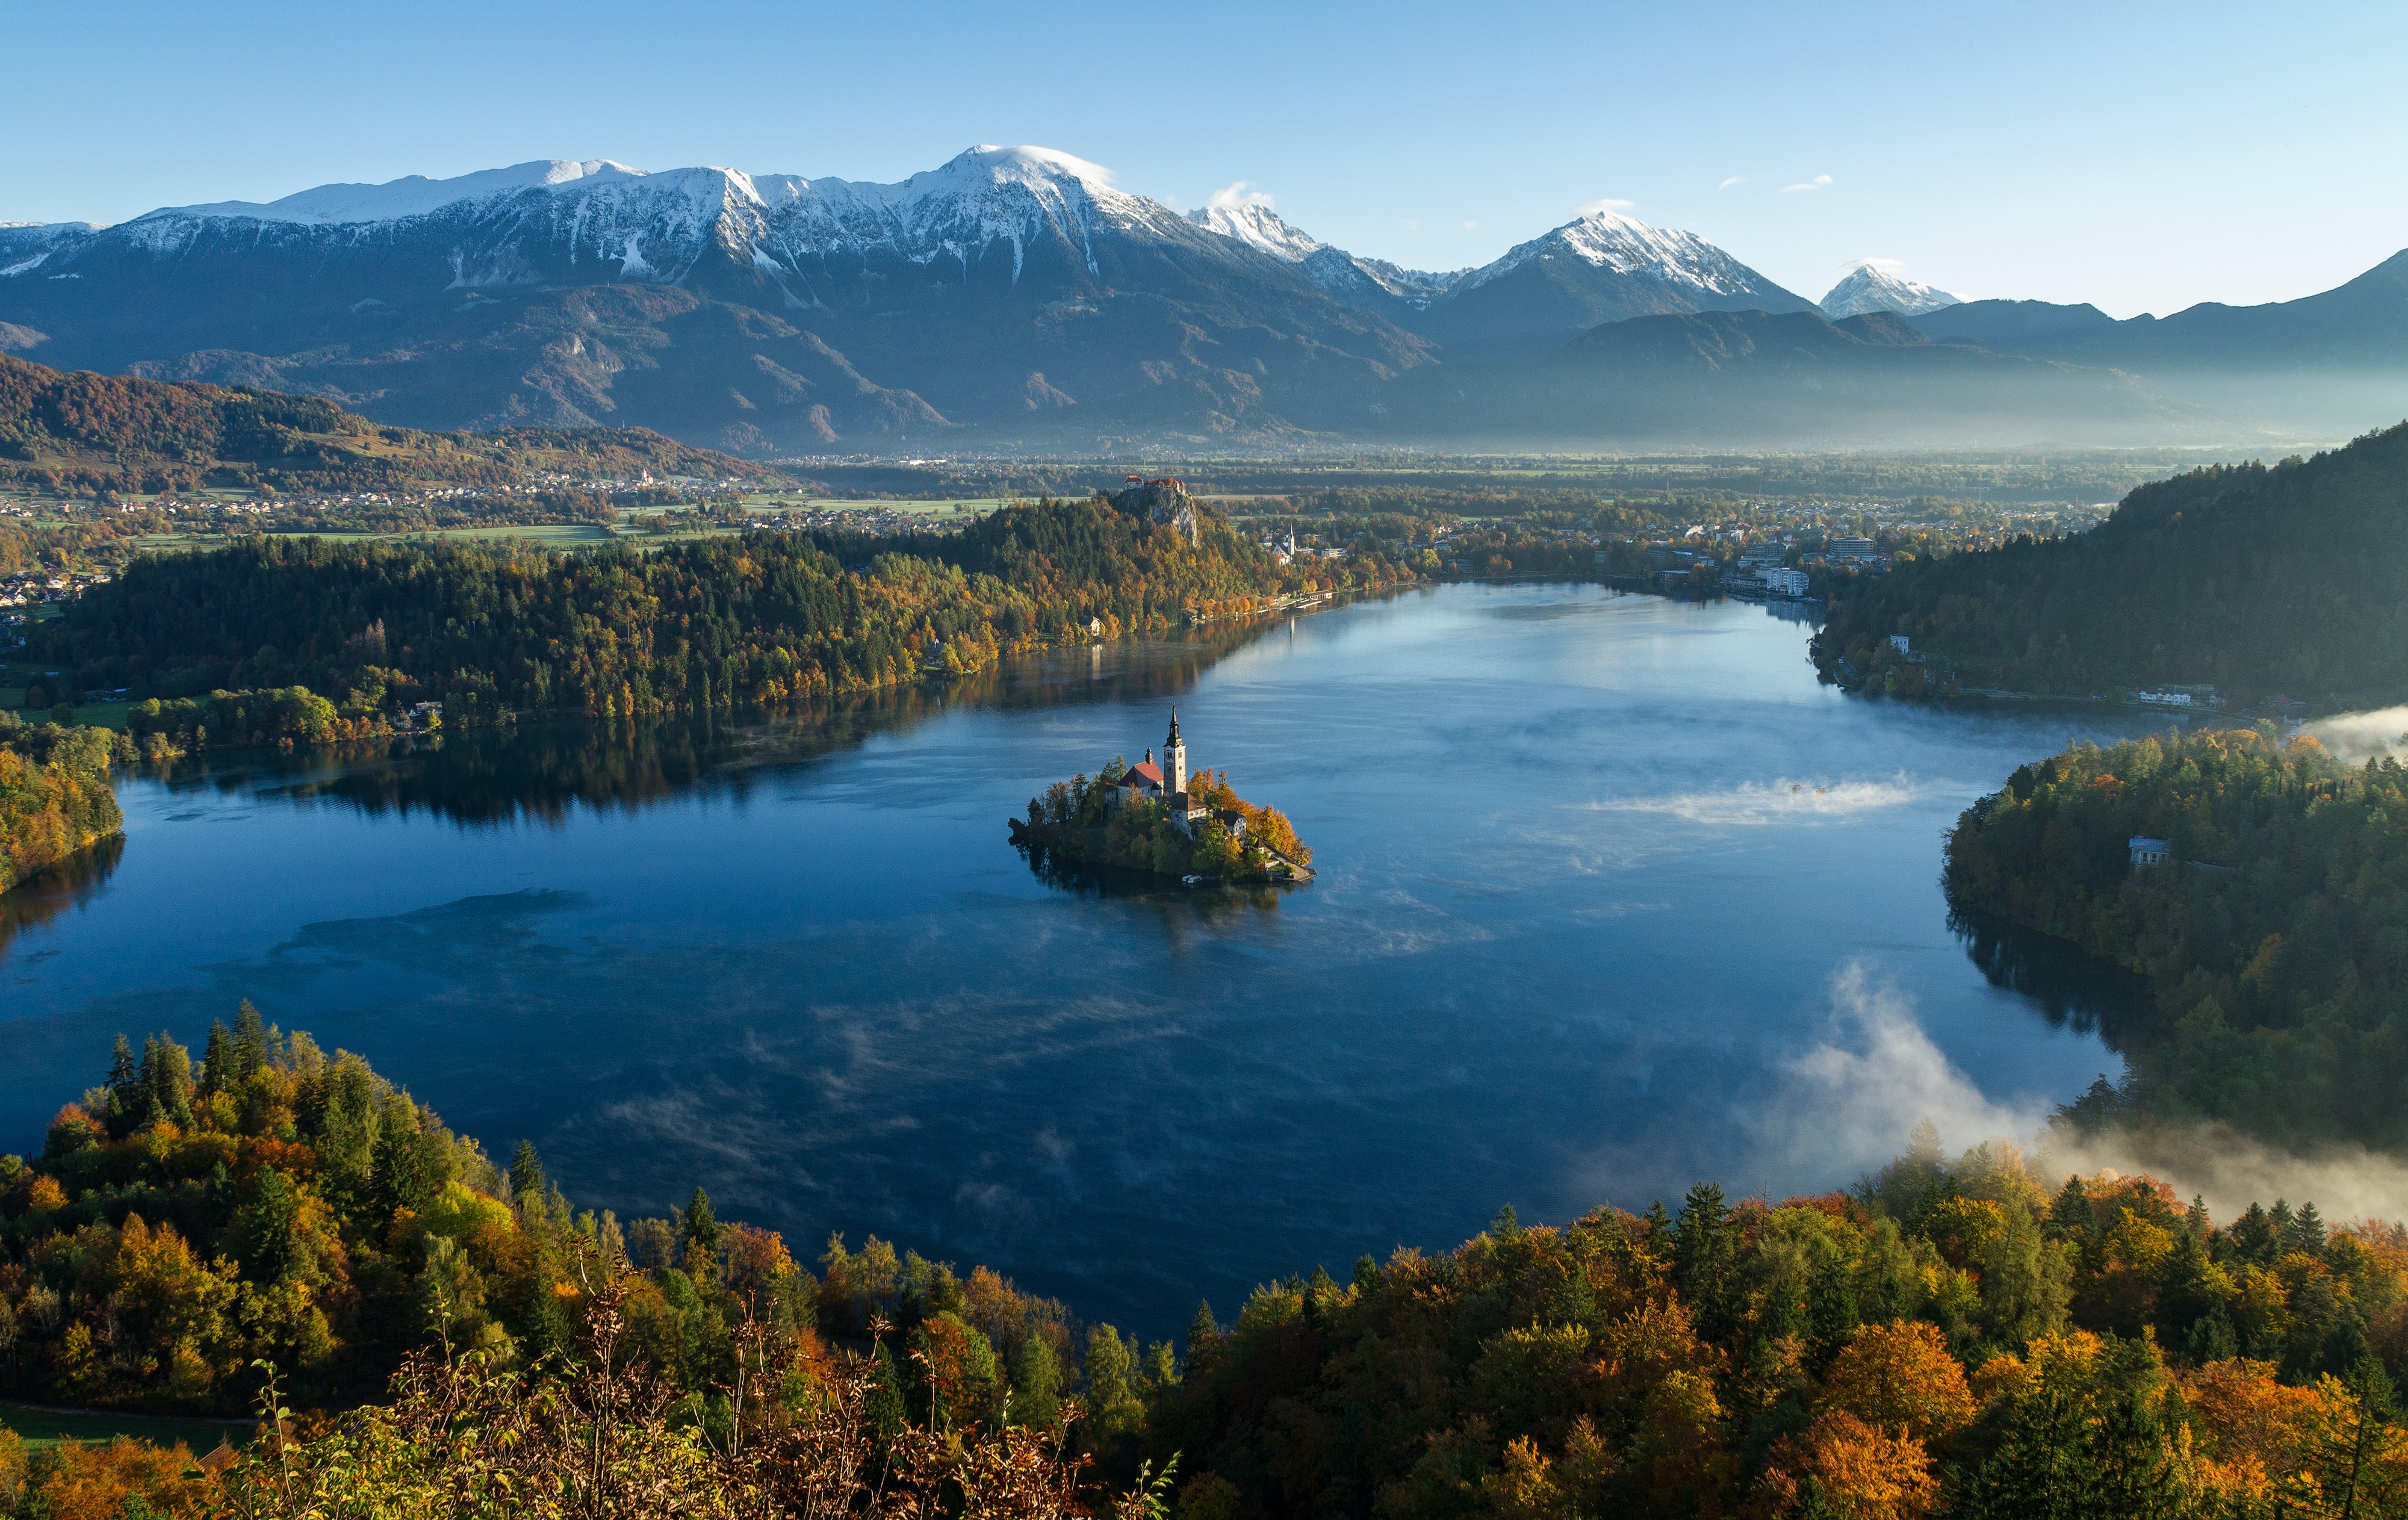 Lake Bled in Slovenia with a mountain view.